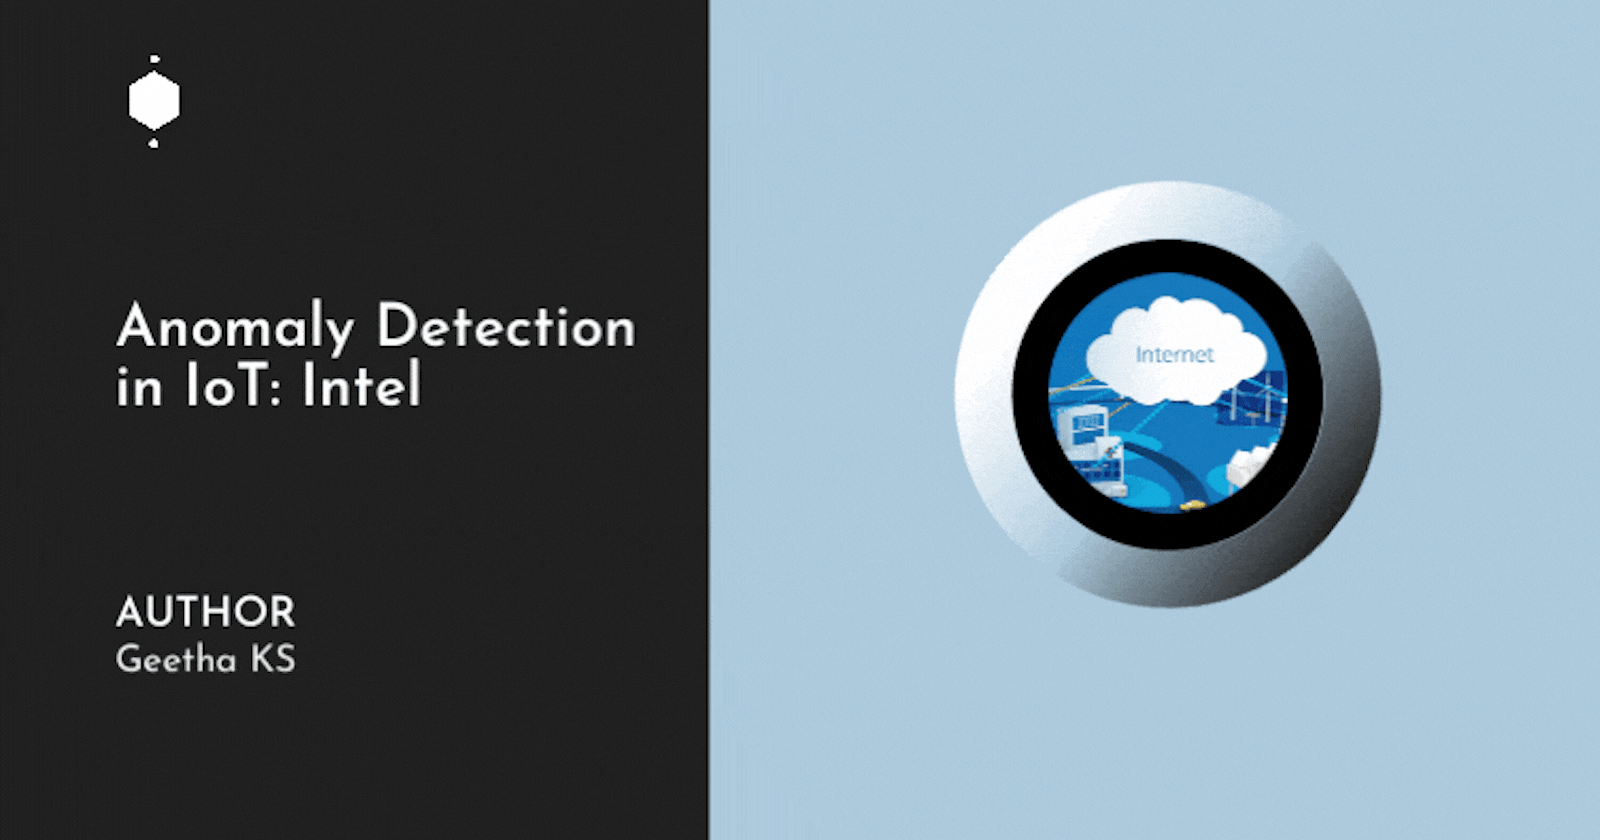 Anomaly Detection in IoT